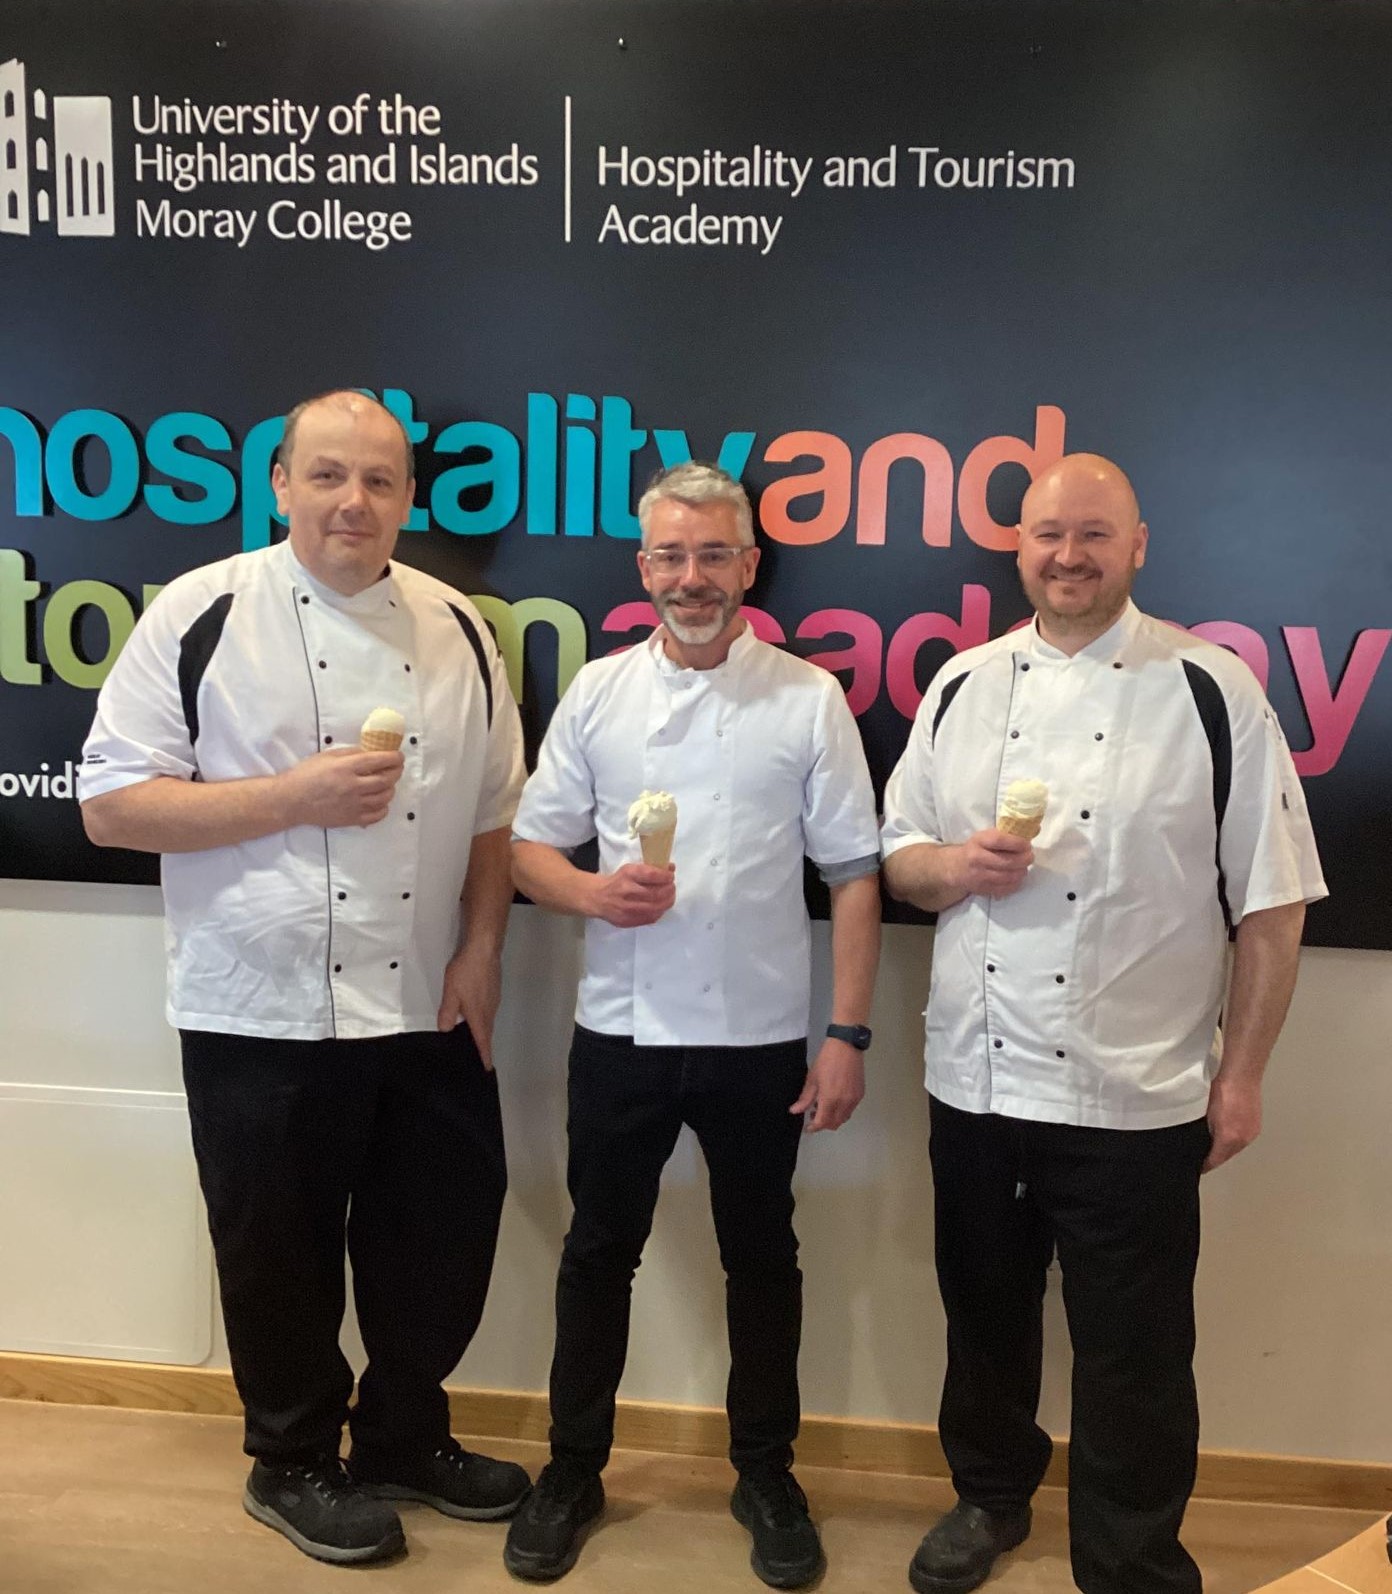 Photograph of two UHI Moray hospitality lecturers, Martyn and Darren, with Stew 'n' Drews staff member. They are all wearing Chef whites and holding an ice-cream each, smiling at the camera.